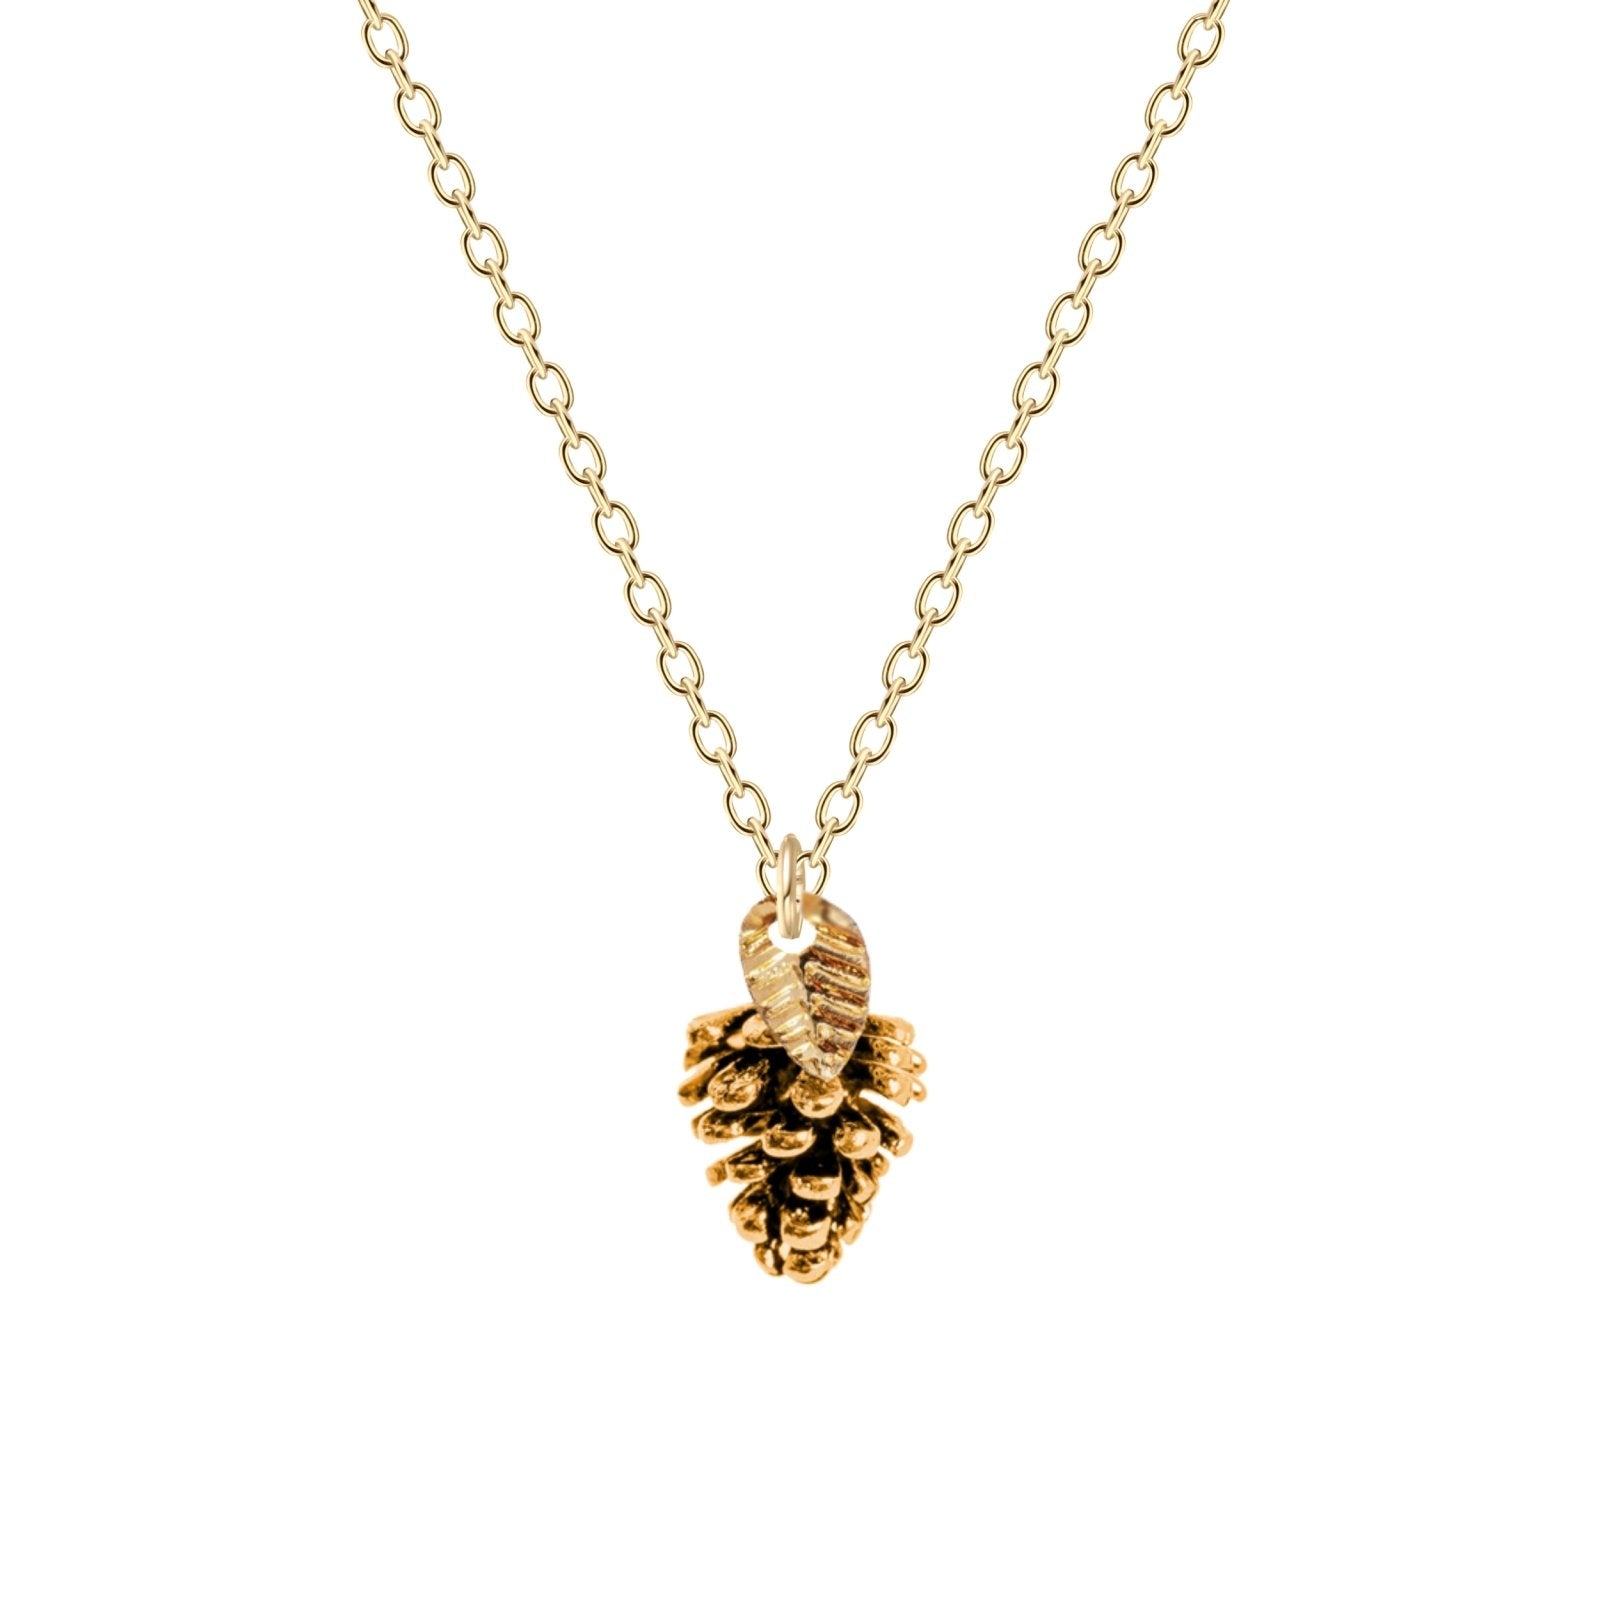 Pinecone Necklace With Leaf - Melanie Golden Jewelry - christmas, christmas jewelry, halloween, halloween jewelry, necklace, necklaces, pendant necklaces, thanksgiving, thanksgiving jewelry